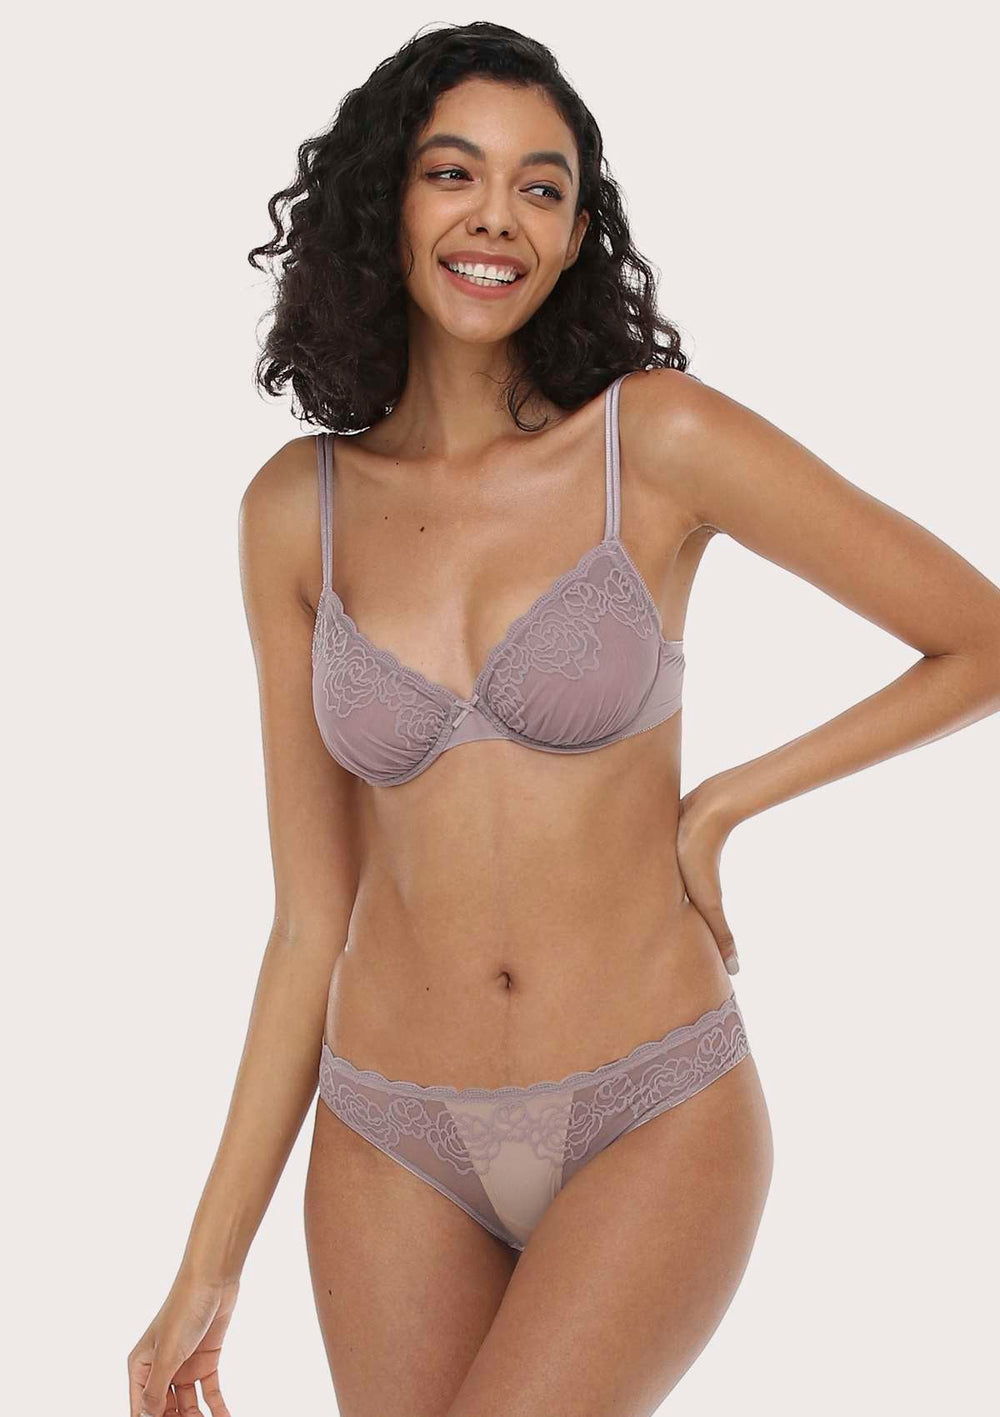 HSIA Enchante Lace Bra and Panties Set: Back Support Bra for Posture